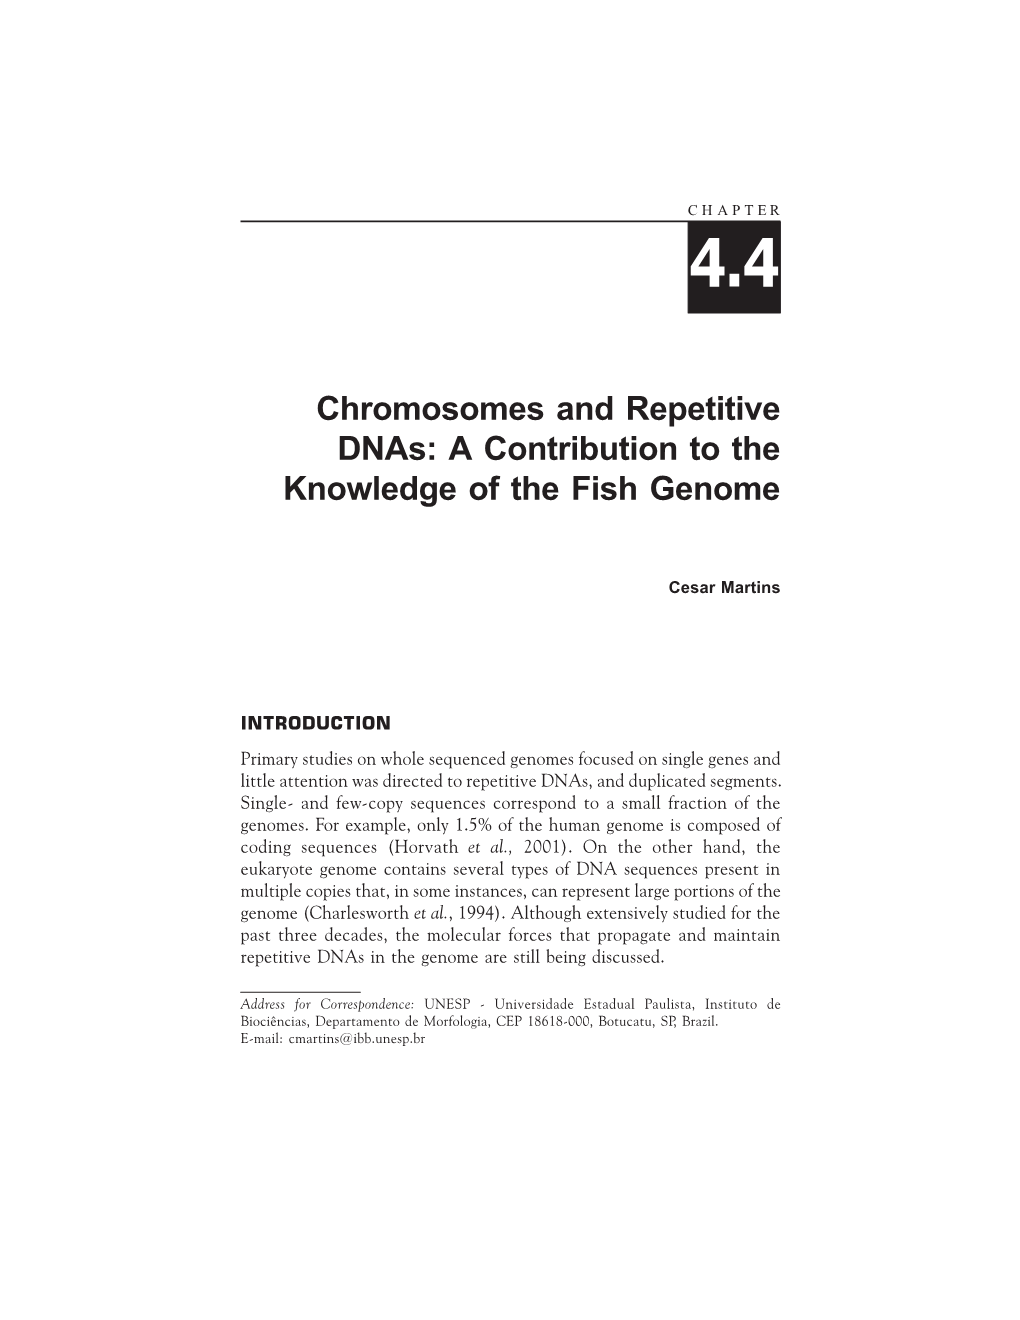 Chromosomes and Repetitive Dnas: a Contribution to the Knowledge of the Fish Genome